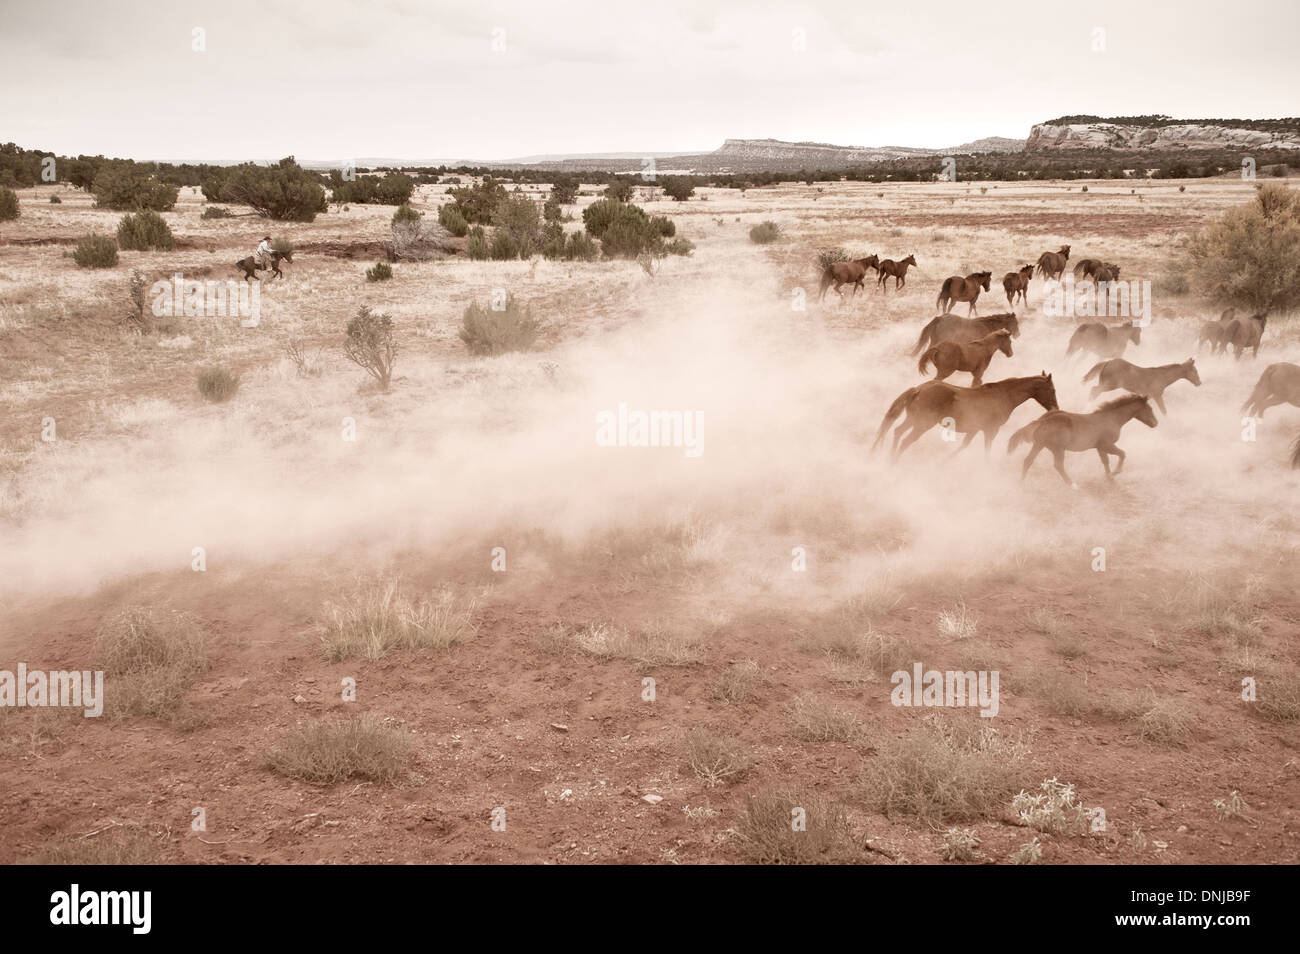 A lone cowboy rides an American Quarter Horse, herding mares across the open plains of a New Mexico ranch. Stock Photo